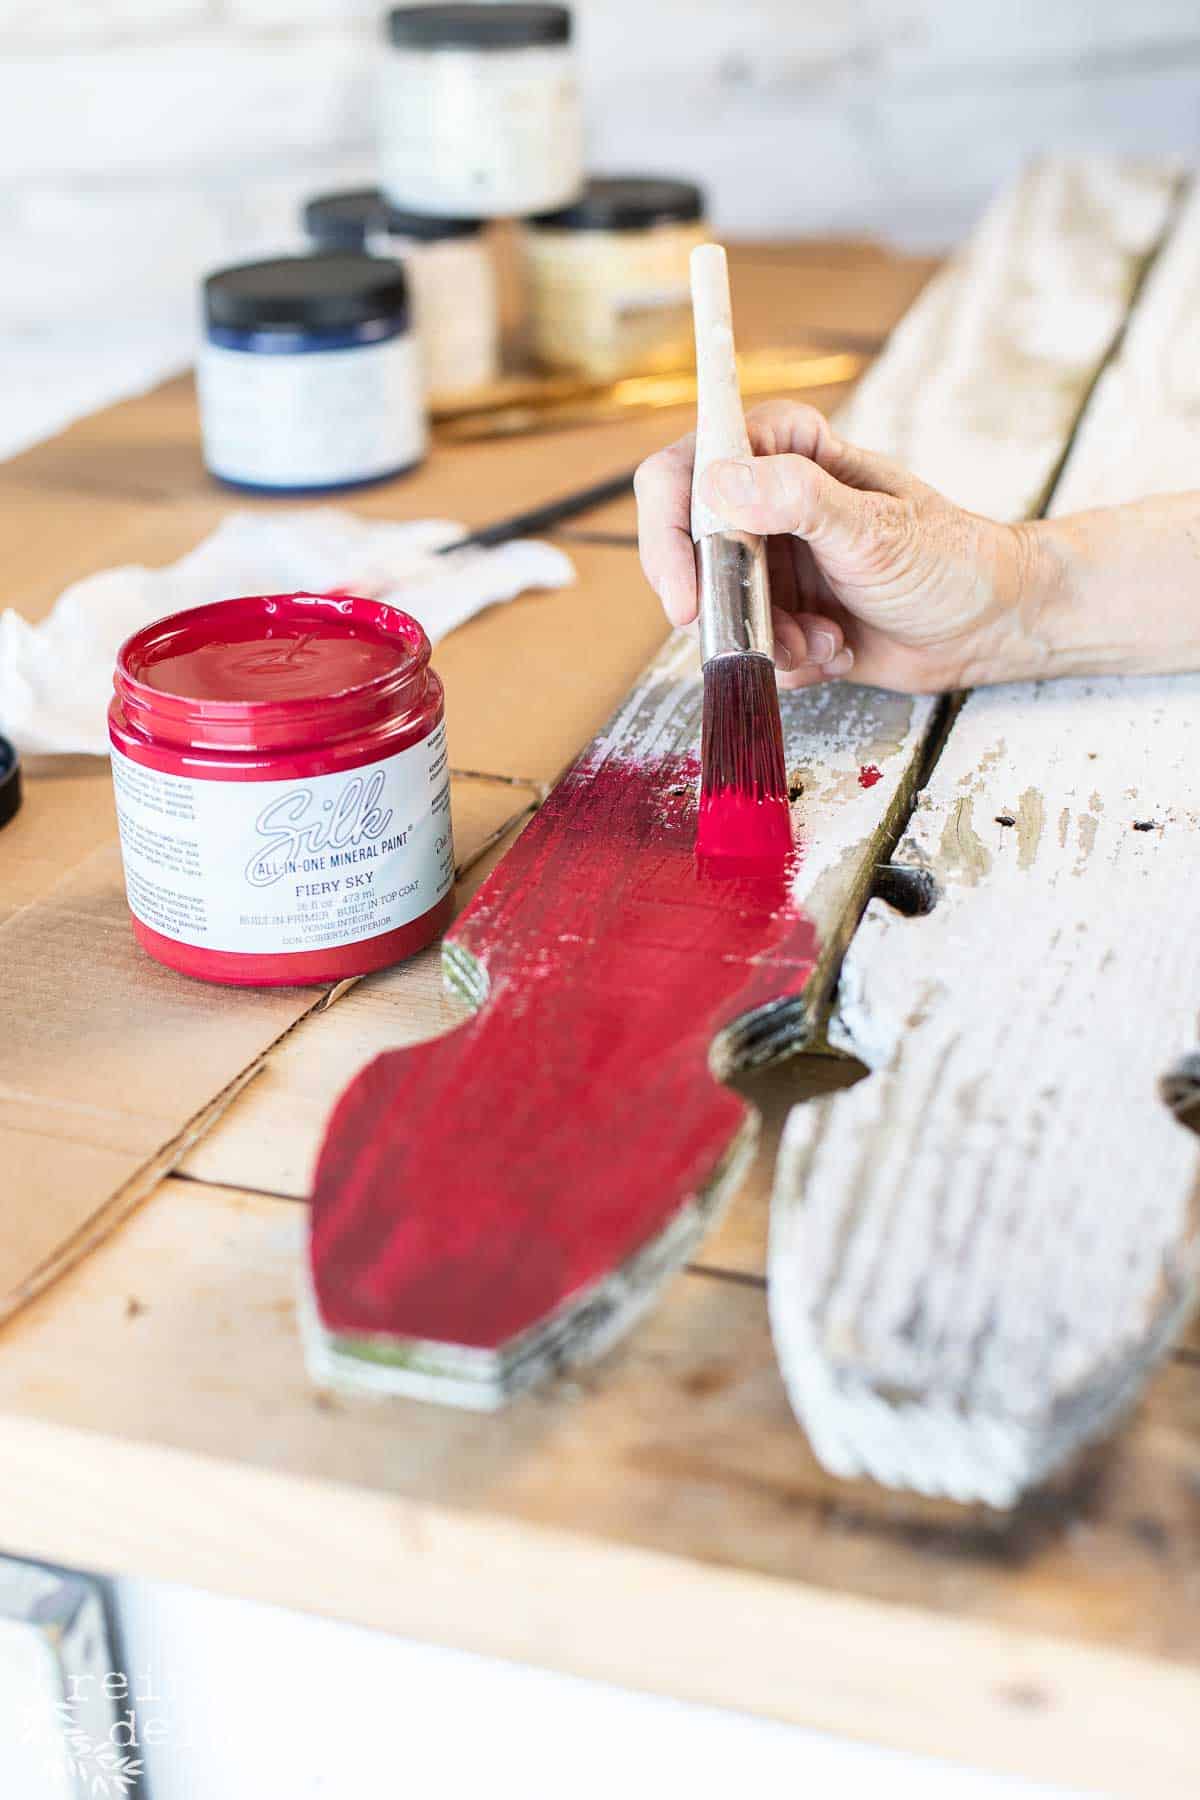 Applying Fiery Sky Silk All-In-One Mineral Paint to one picket of the American flag.